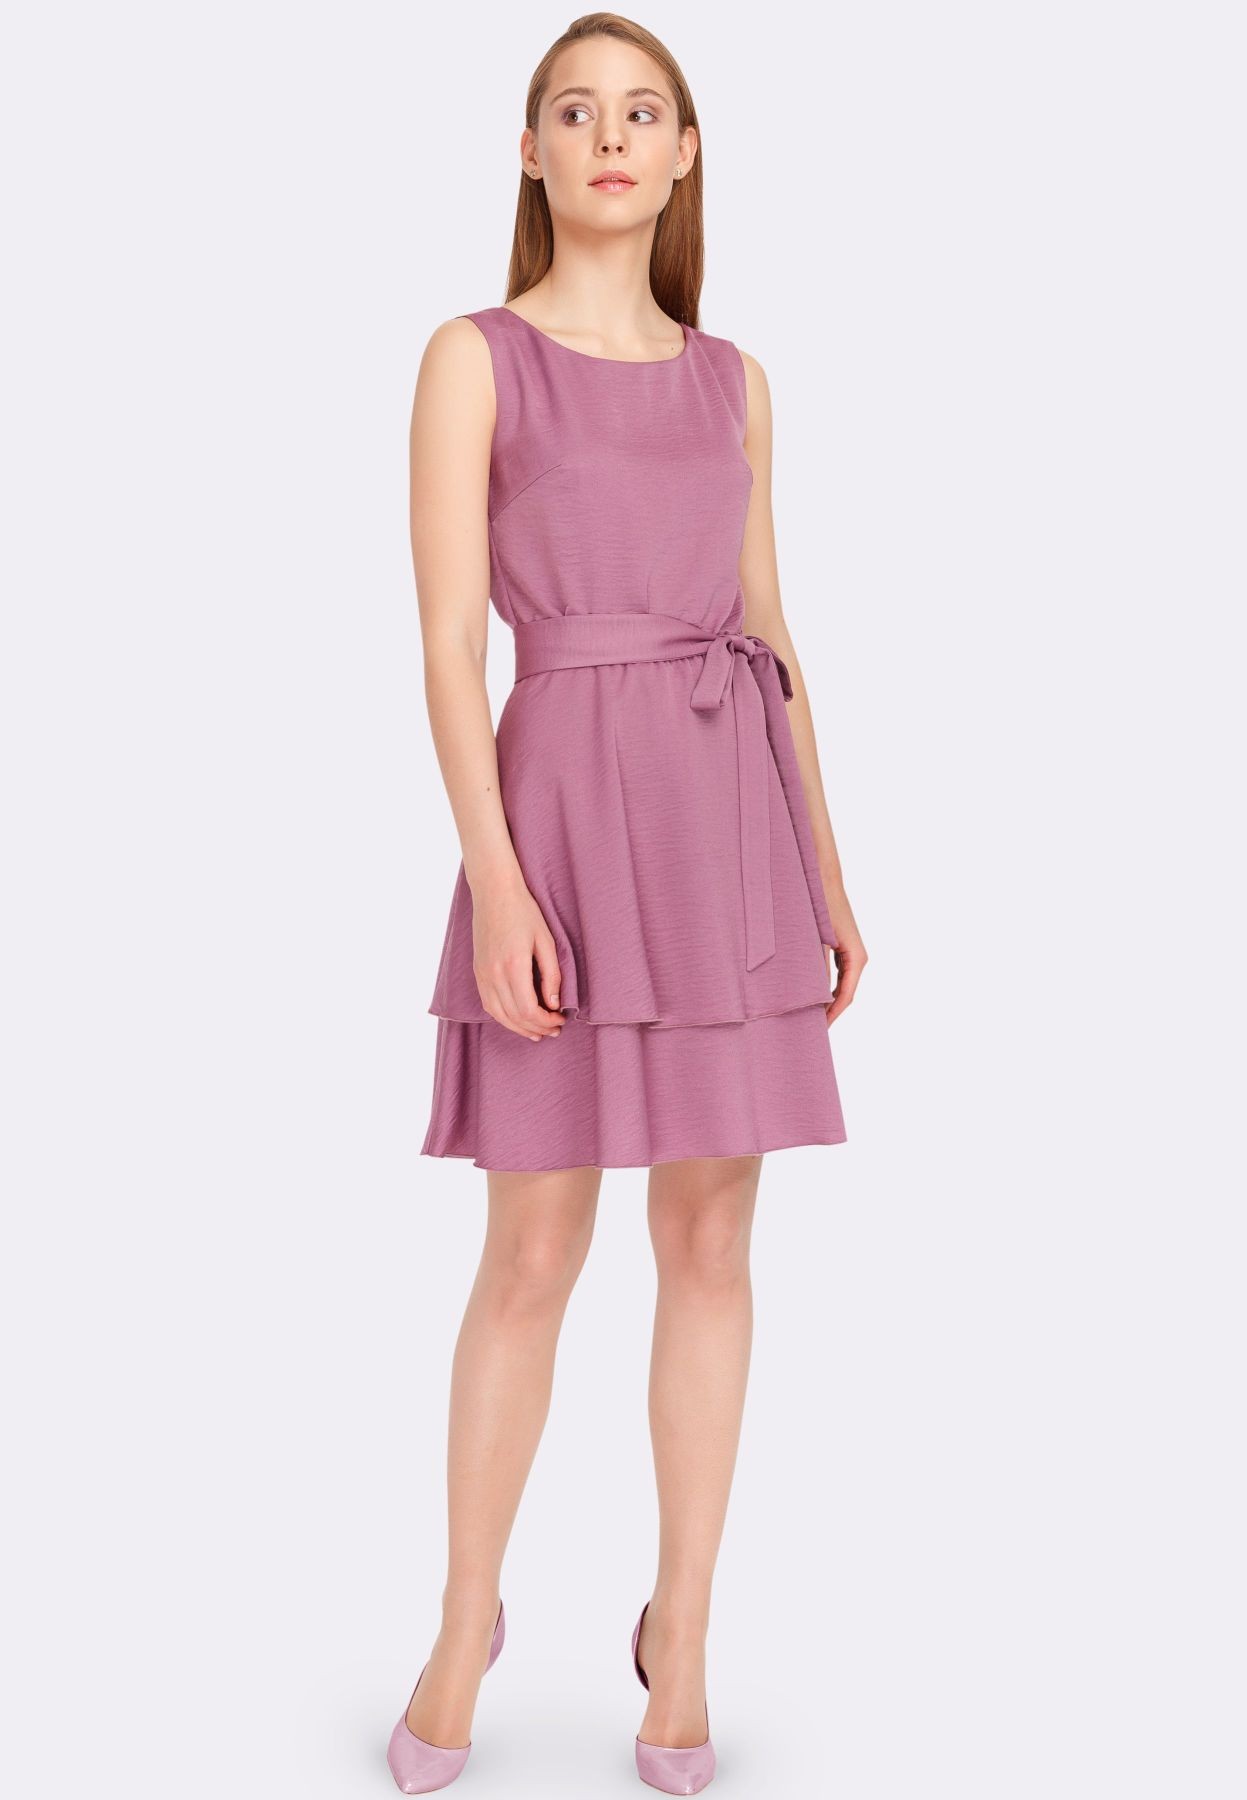 Lilac dress with a two-tiered skirt 5587